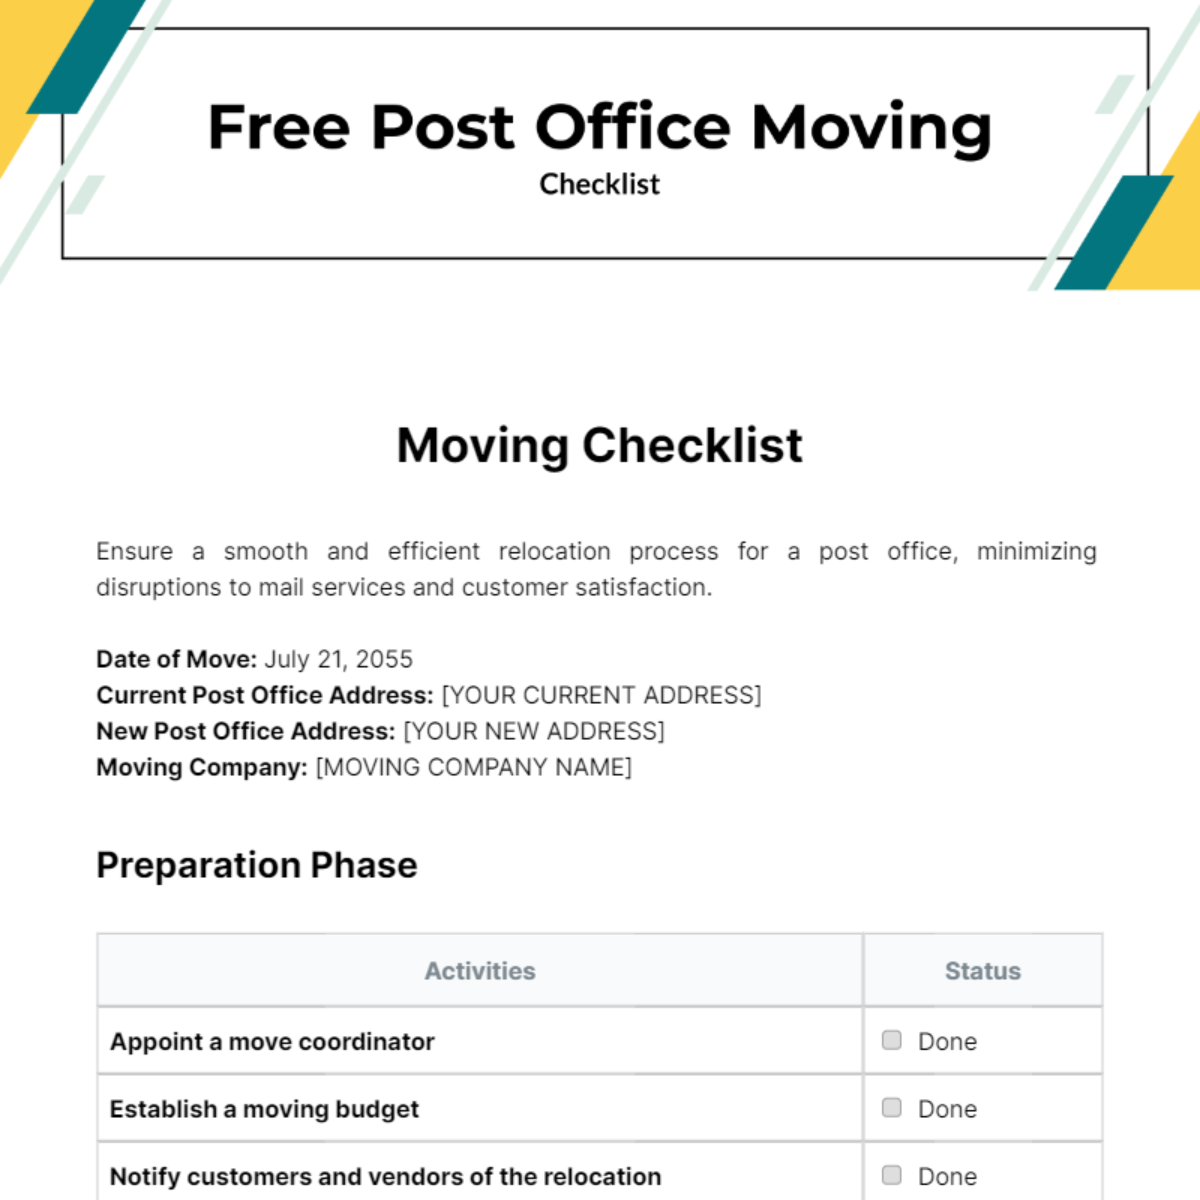 Free Post Office Moving Checklist Template